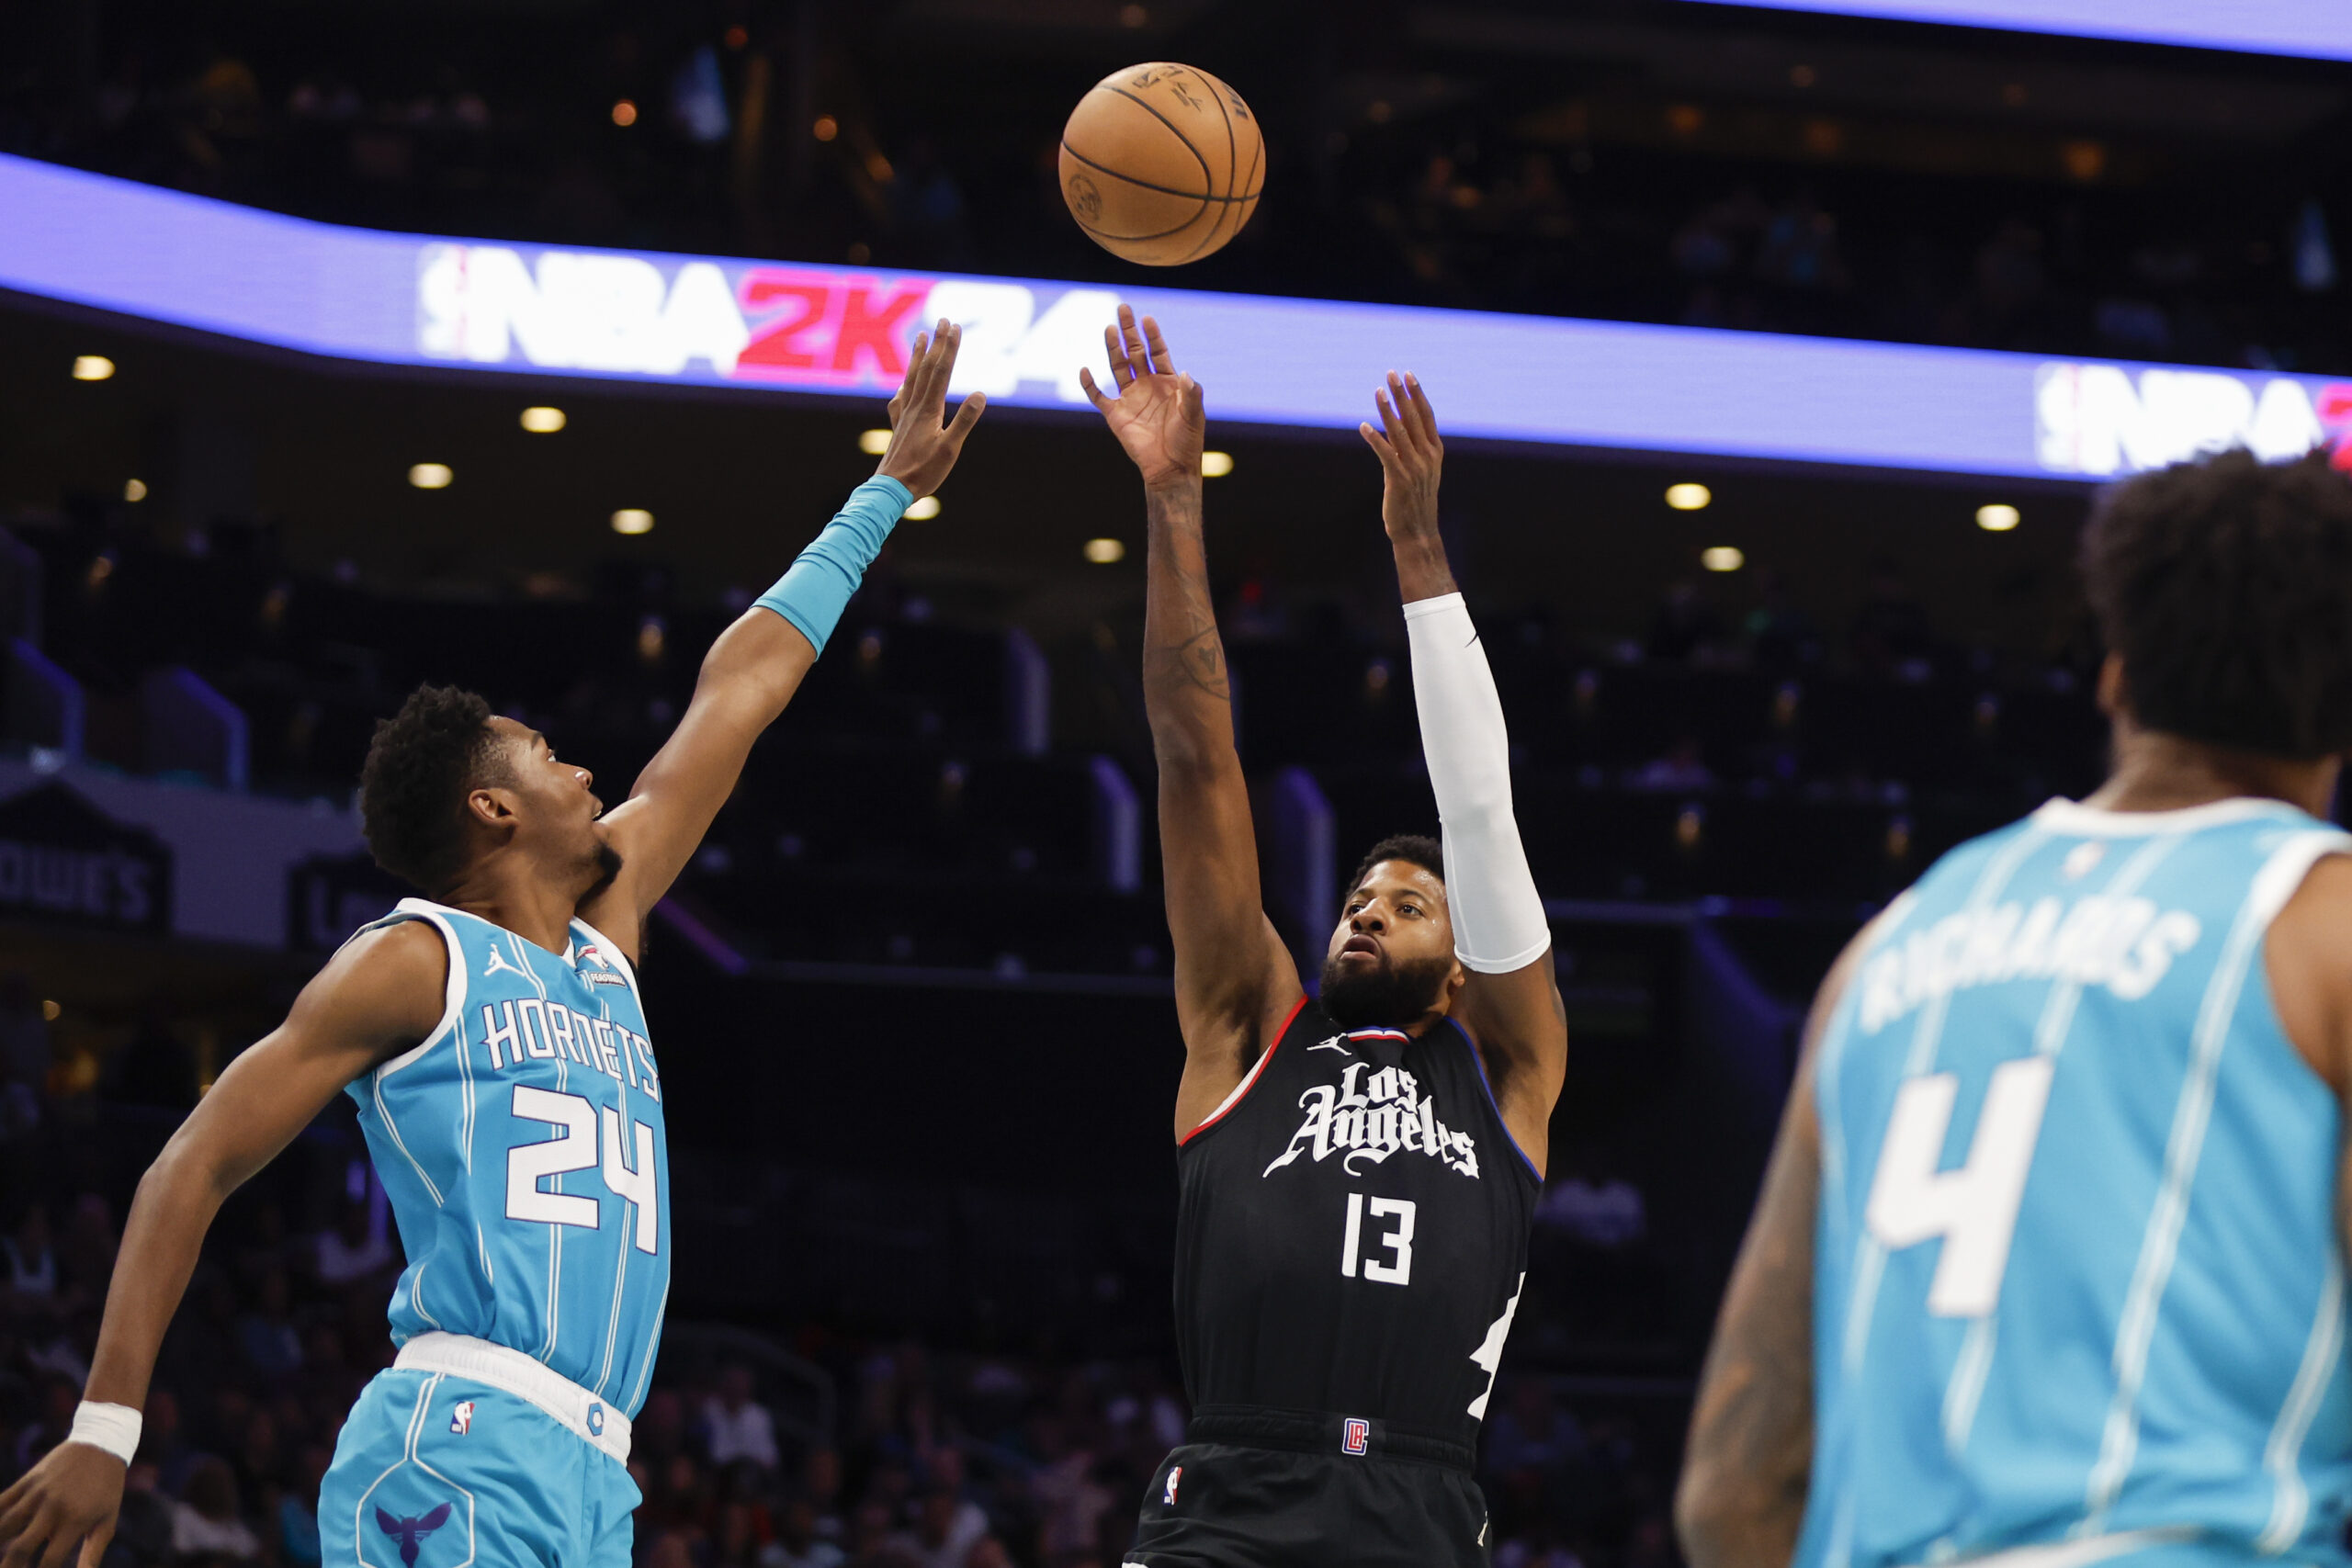 Paul George Clippers beat Hornets NBA